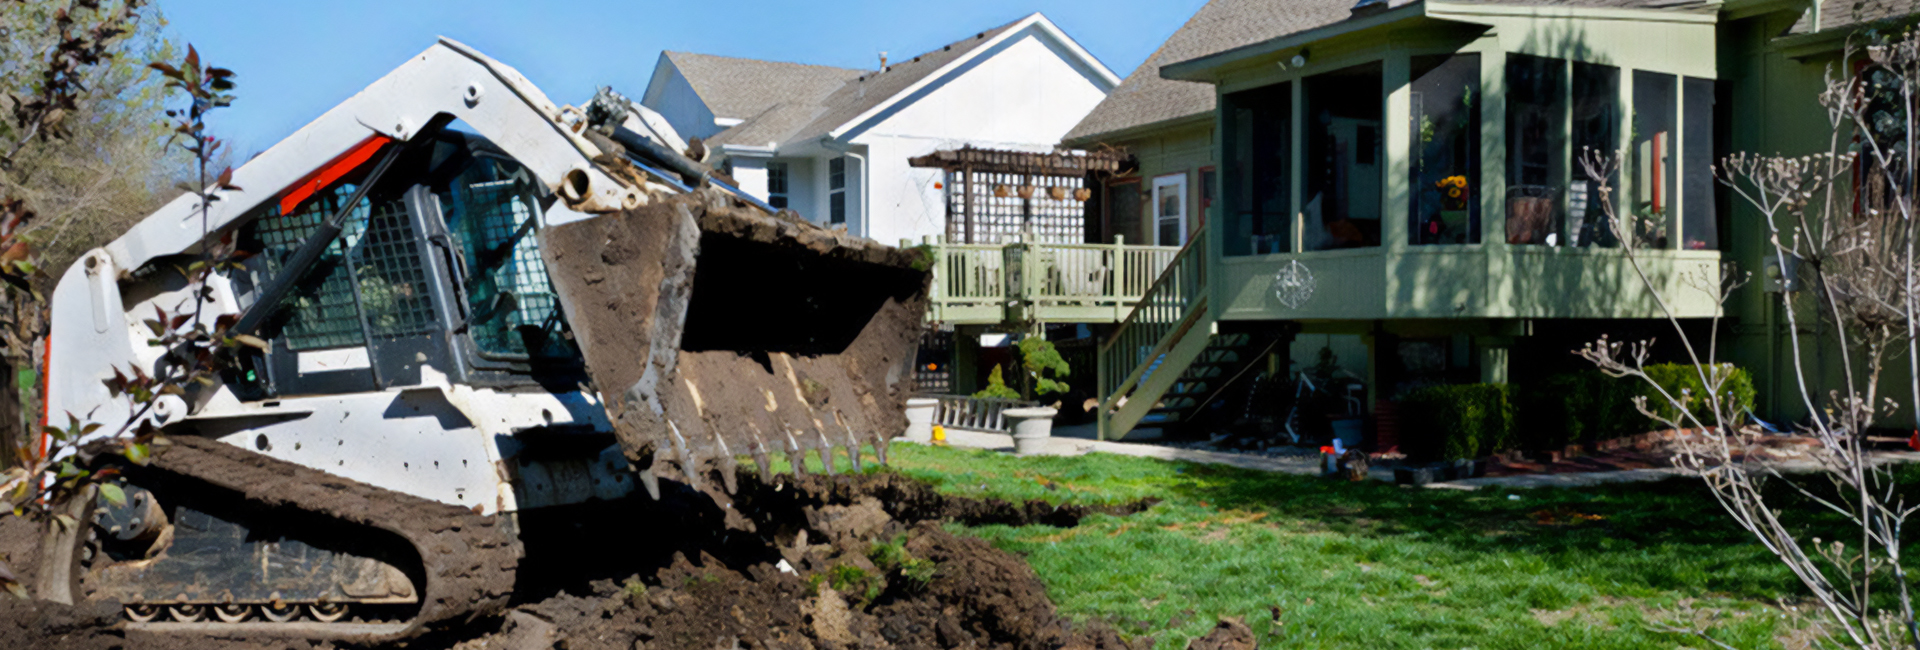 homeowners insurance ny Underground Utility Line Coverage from madison mutual image of backyard construction